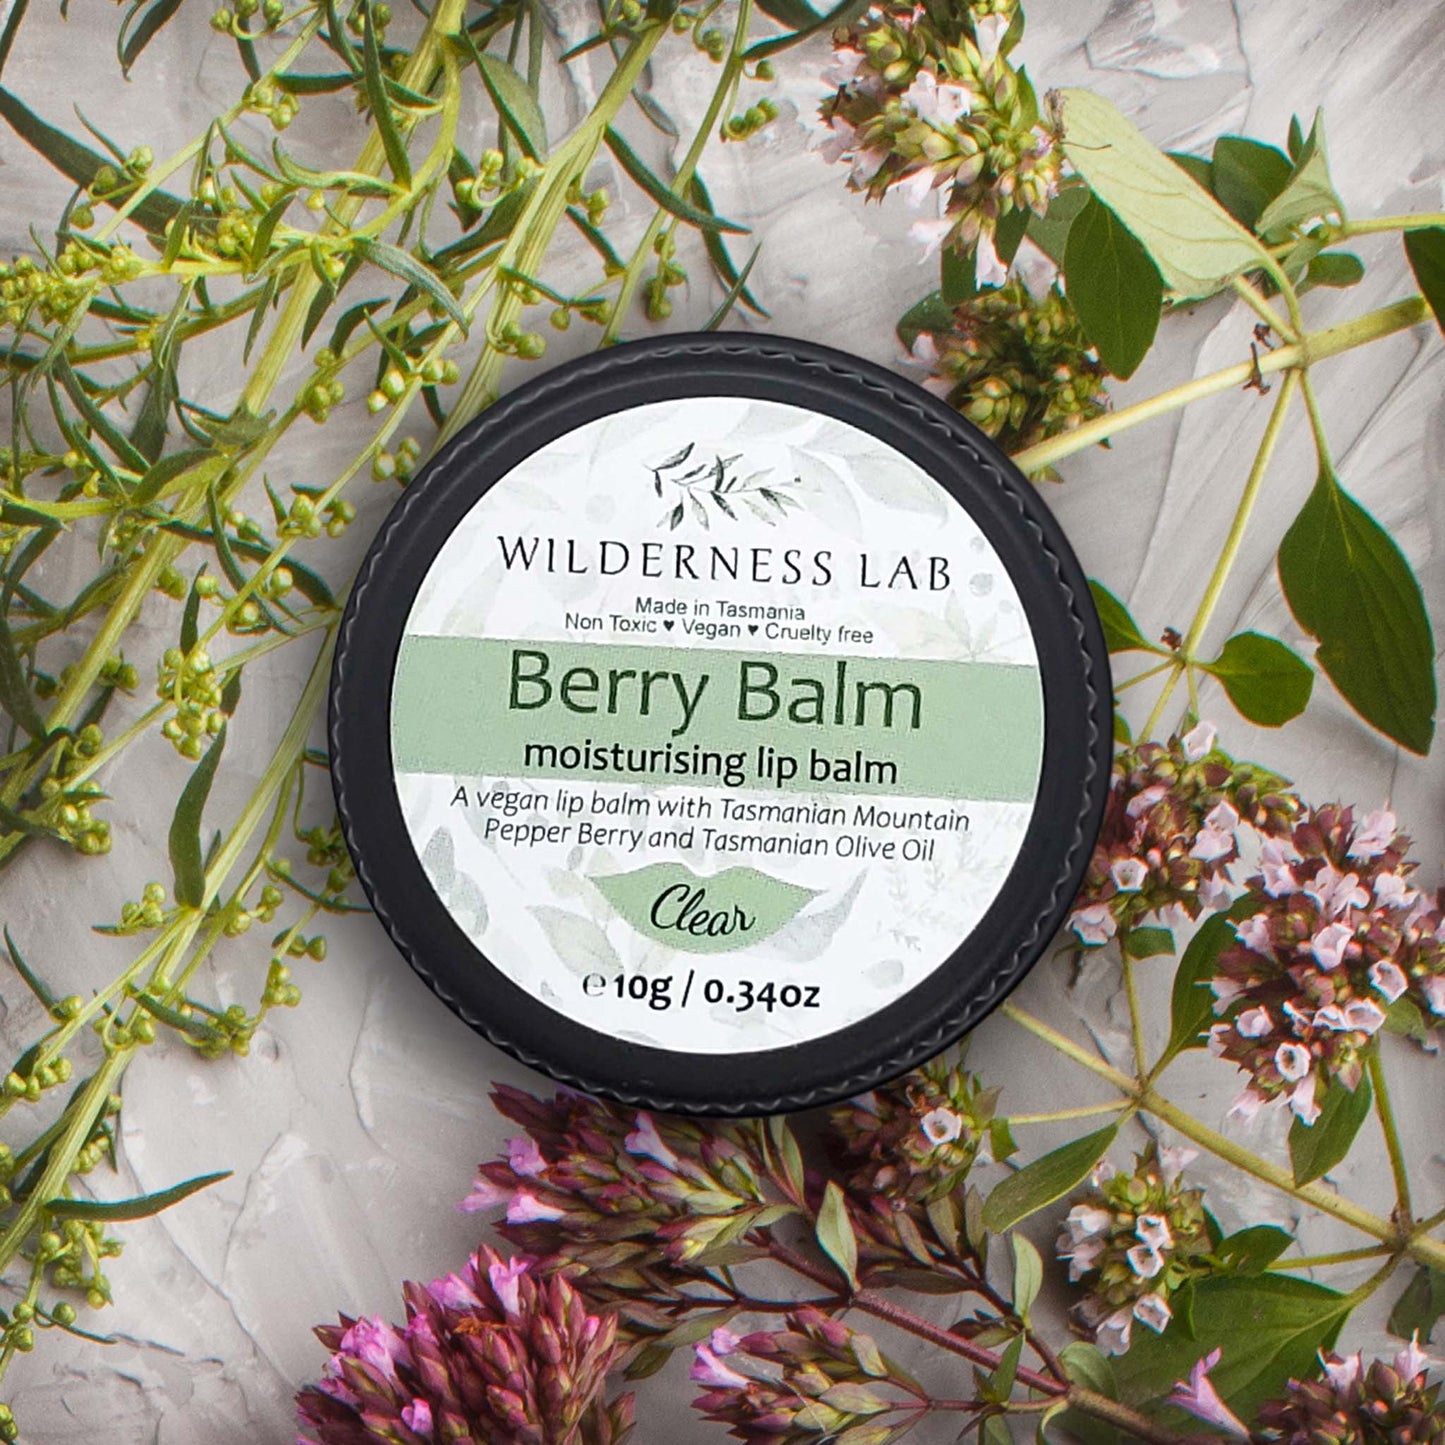 Berry Balm - UNtinted. Clear Vegan lip balm with Tasmanian Mountain Pepper Berry